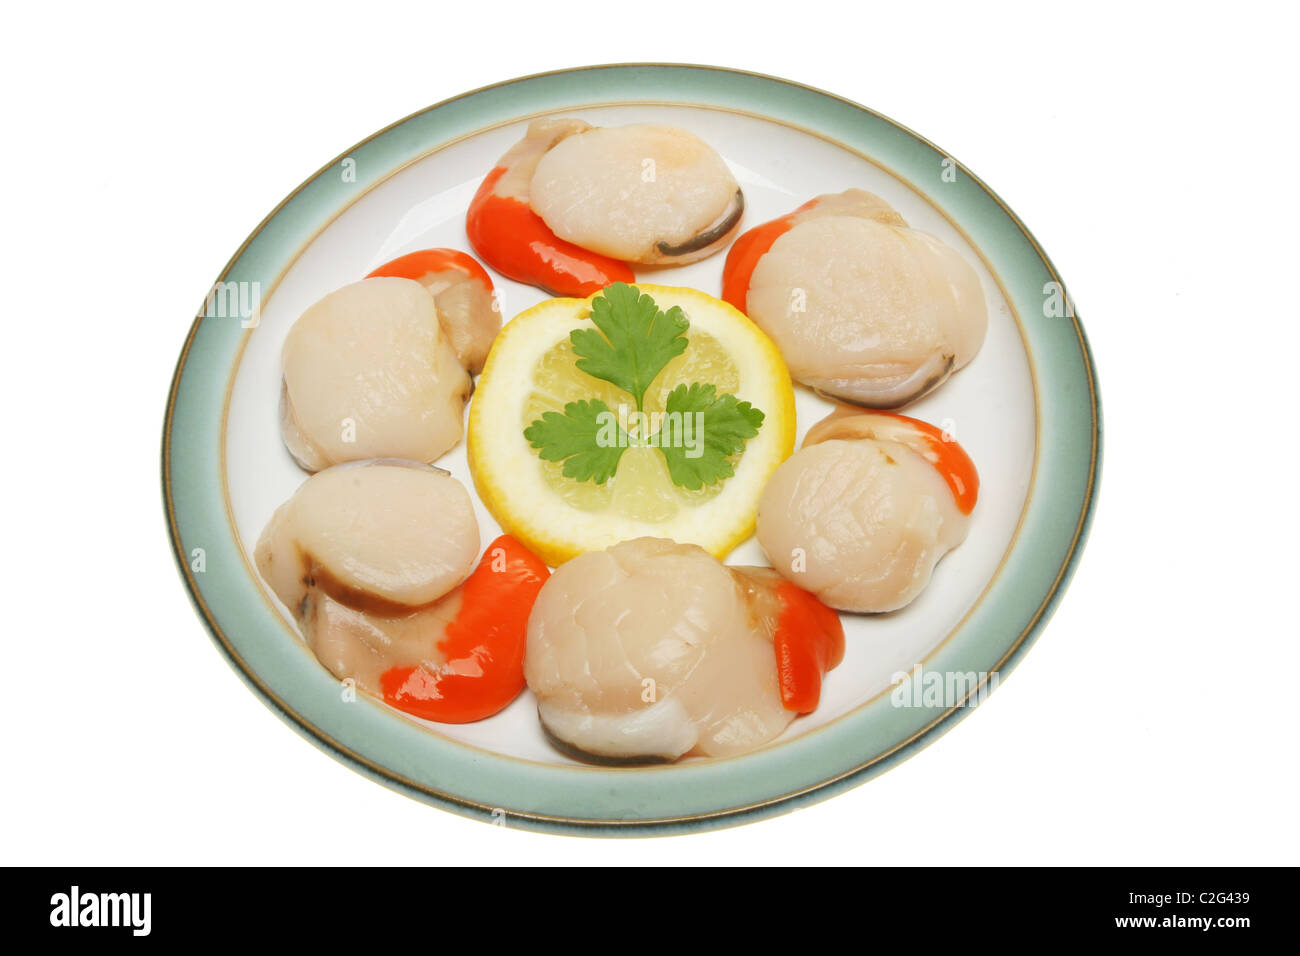 Fresh uncooked scallops on a plate with lemon and parsley Stock Photo